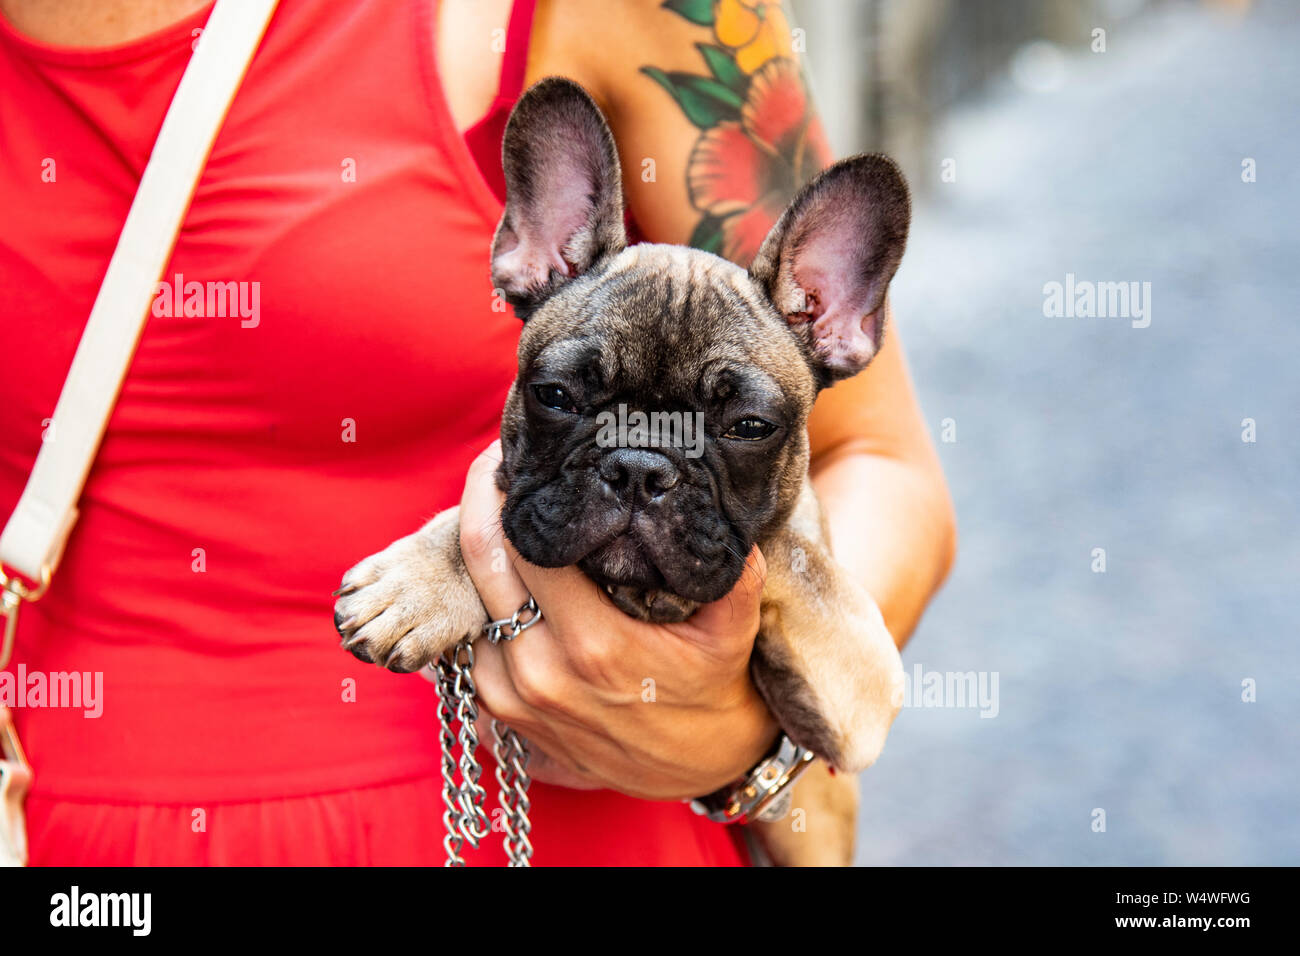 Tattooed woman holding a pug down with big ears Stock Photo